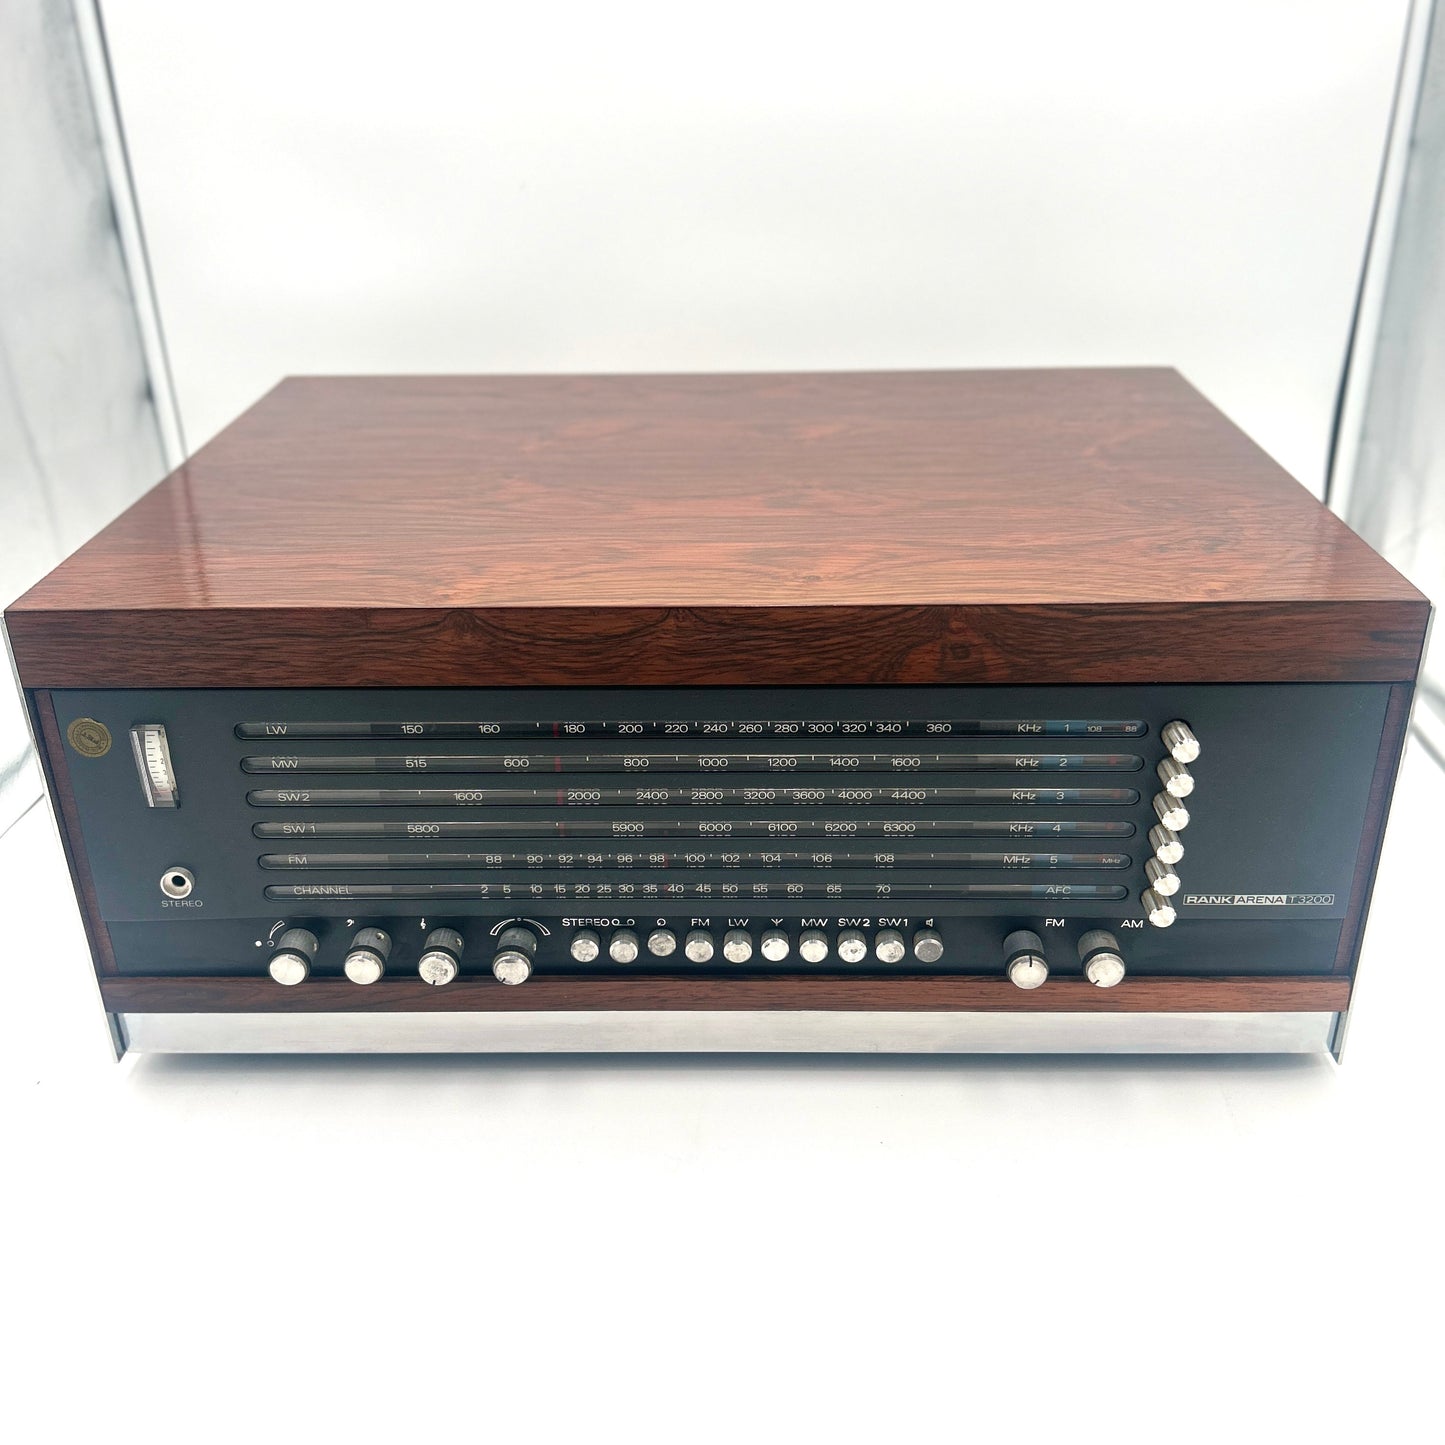 Danish Modern Receiver and Speakers in Rosewood 1972.